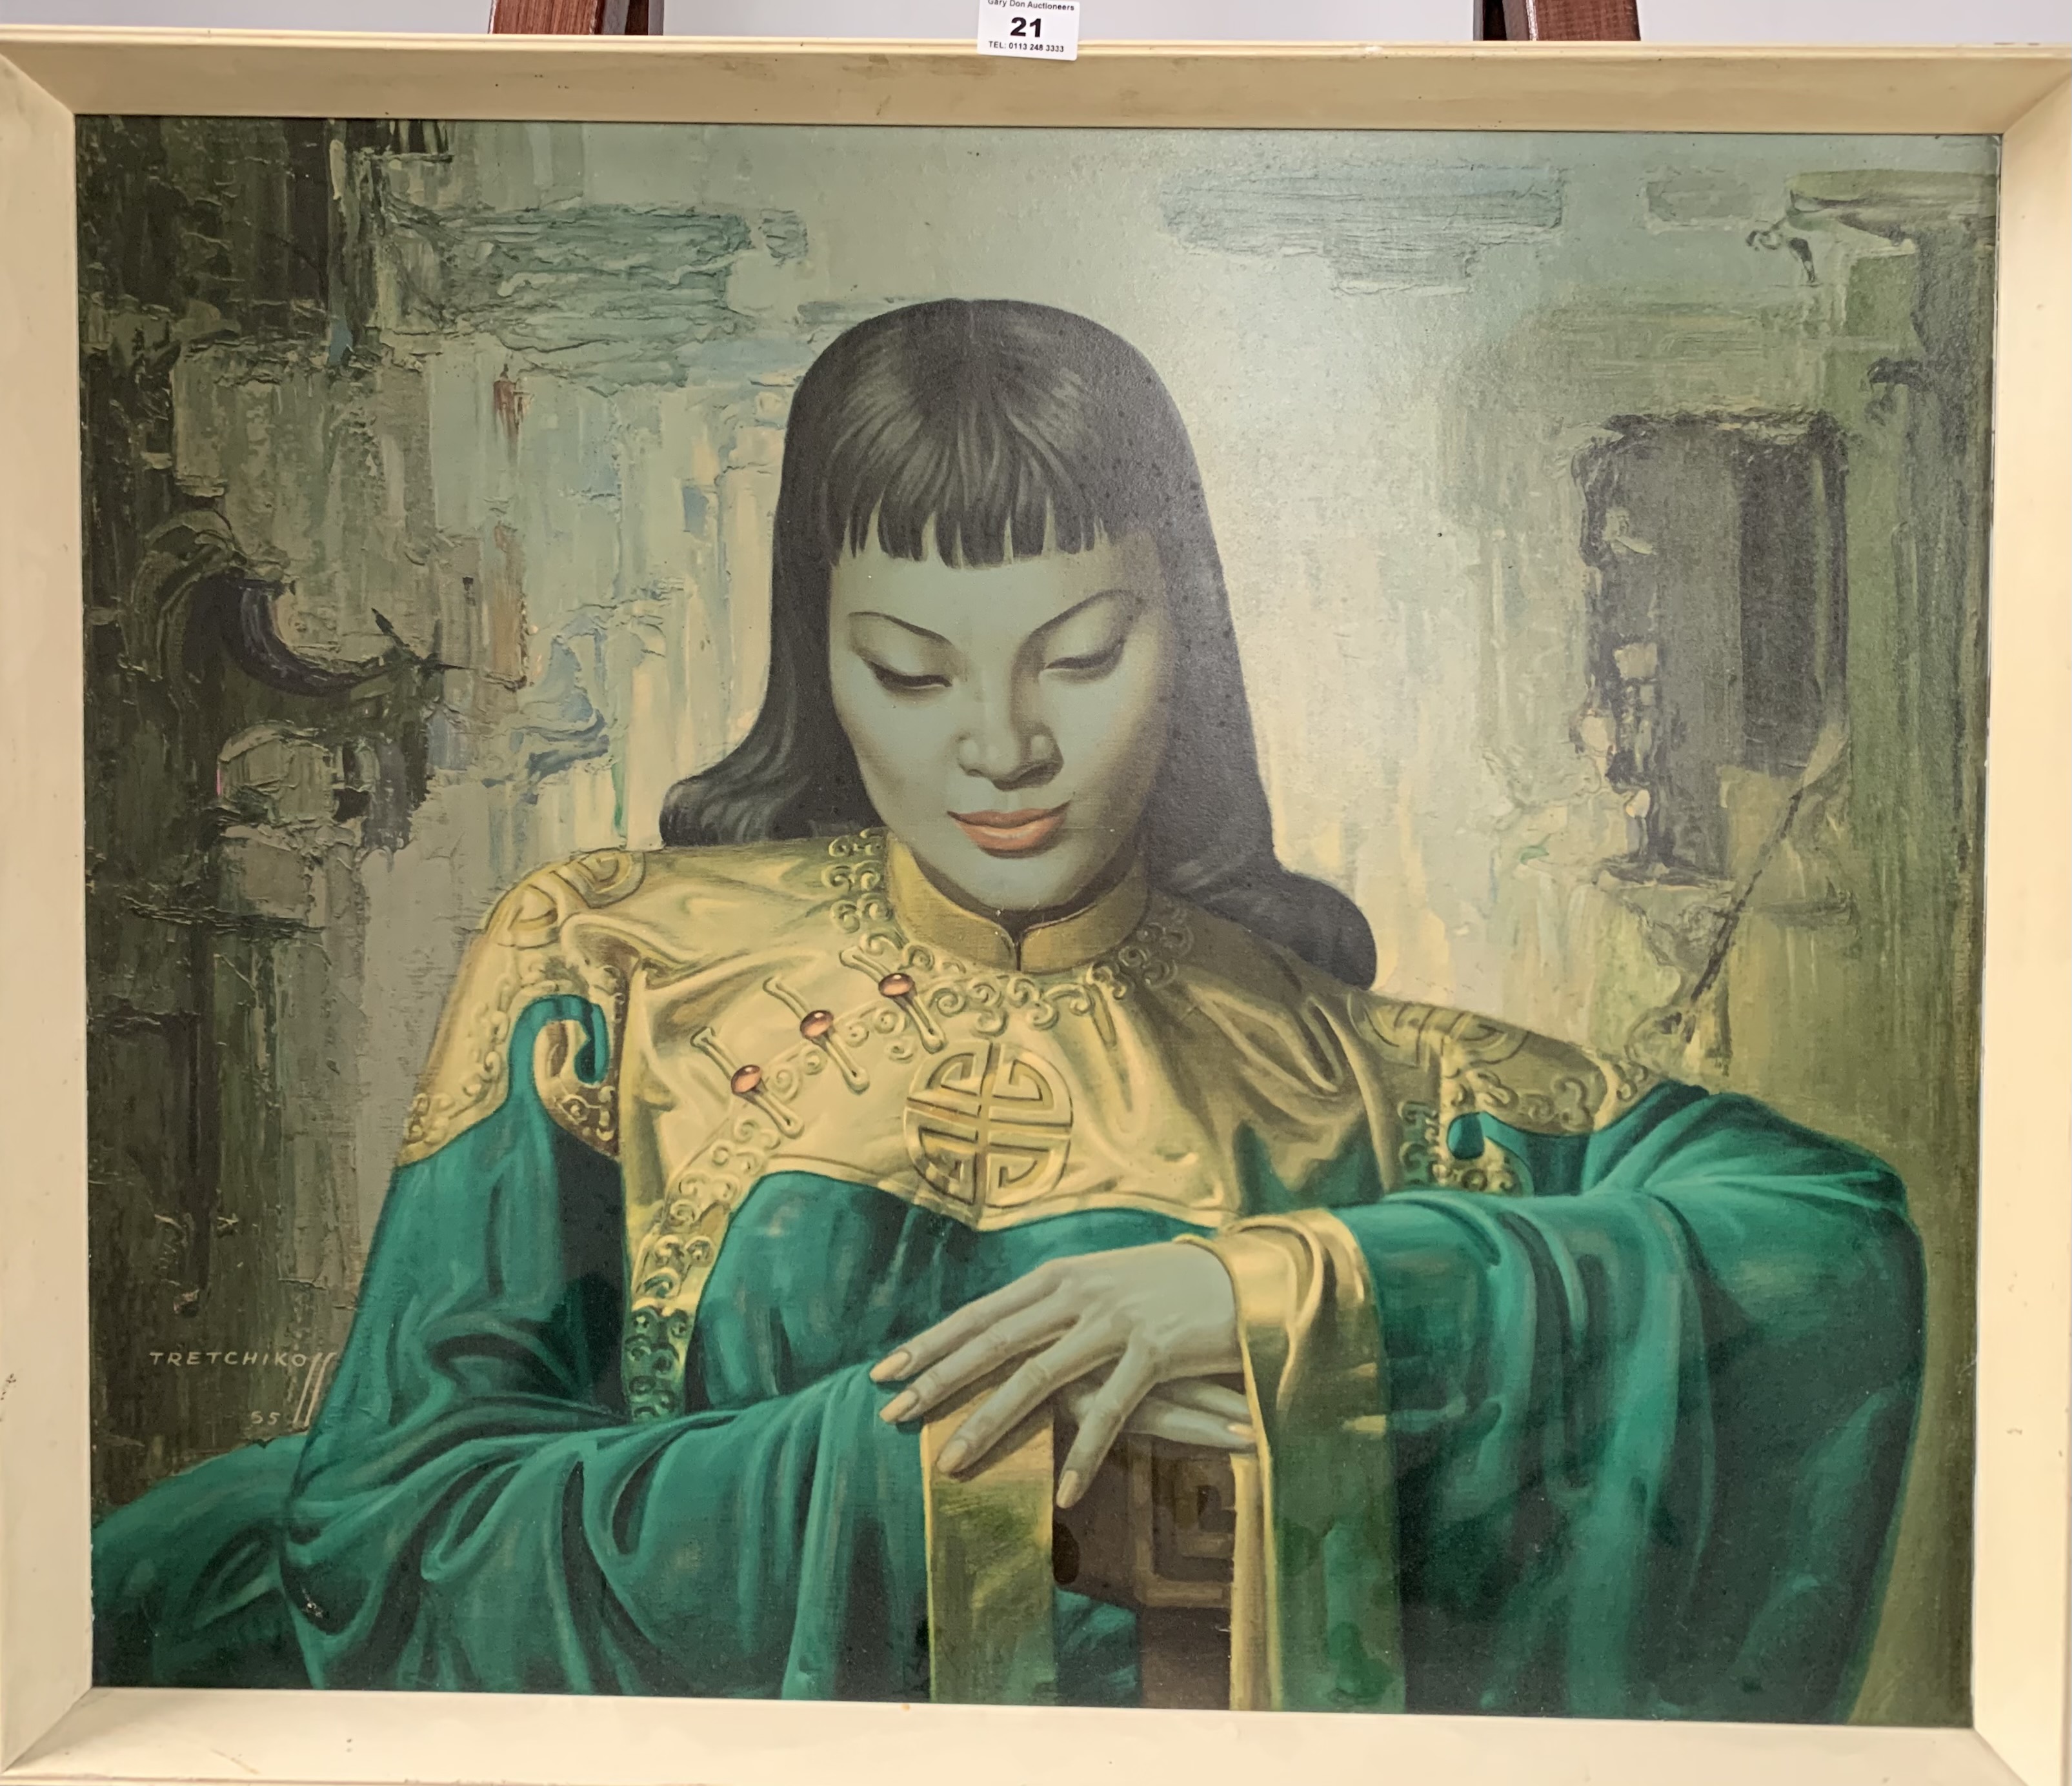 Print on board, “Lady from the Orient” by V. Tretchikoff, 27” x 22.5”, frame 29” x 24.5”. Print good